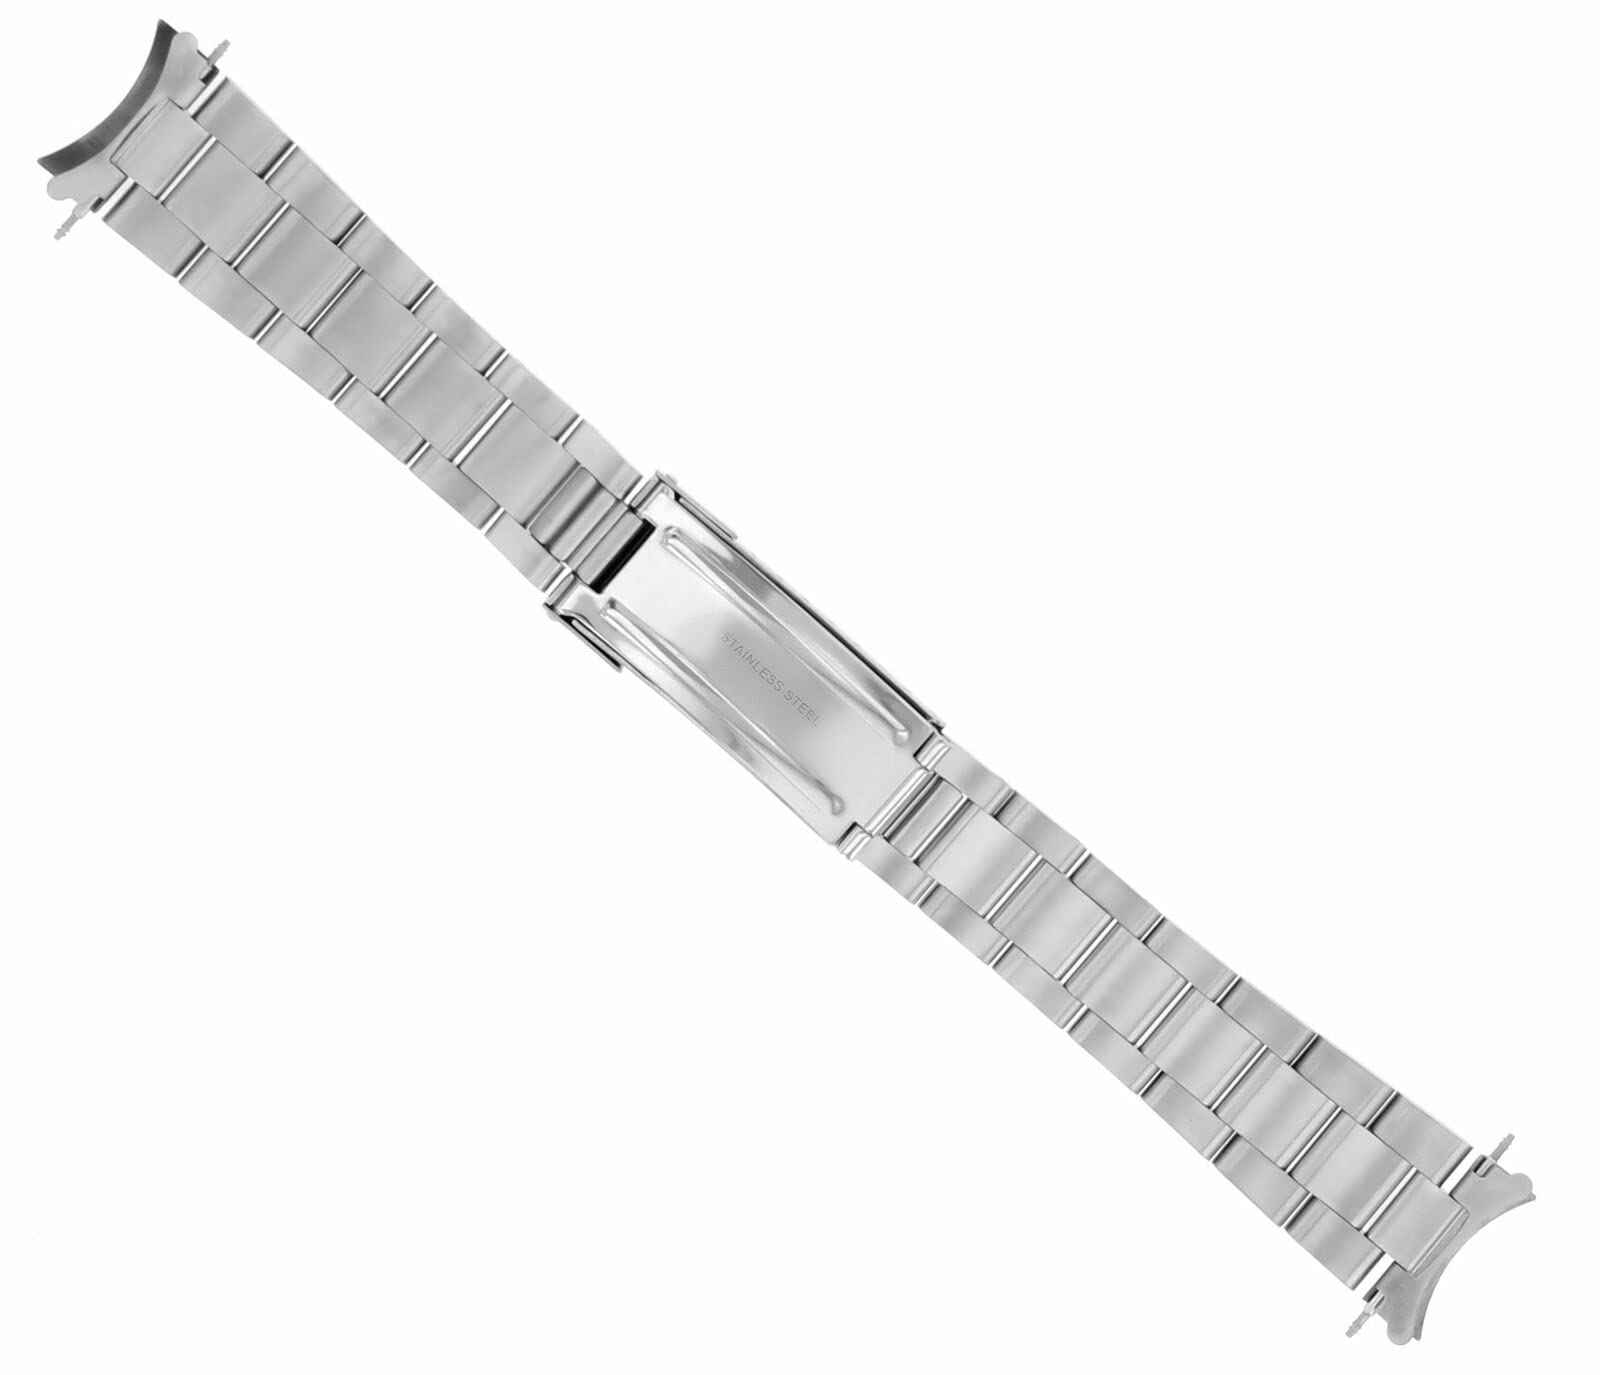 Ewatchparts STAINLESS STEEL WATCH BAND COMPATIBLE WITH ROLEX GMT MASTER, MASTER 2 16700, 16710, 16760